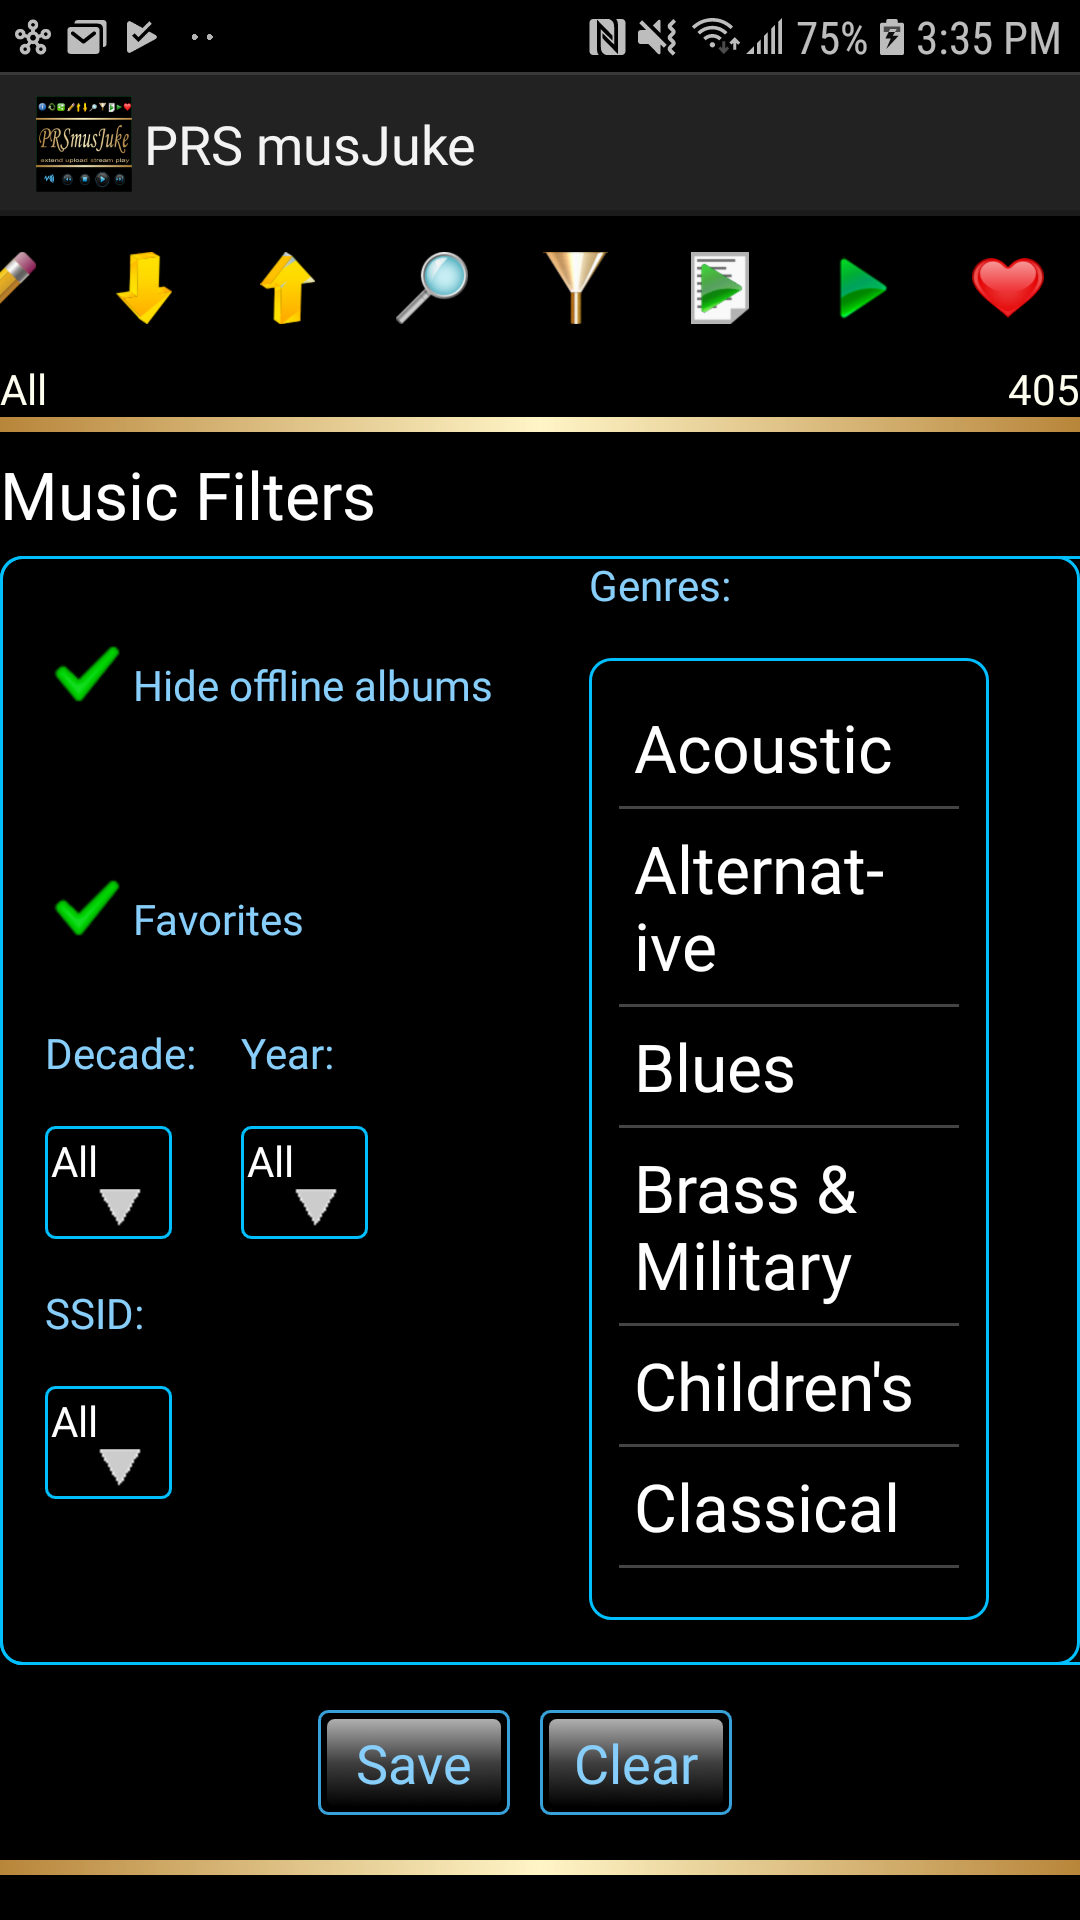 Set up Filters